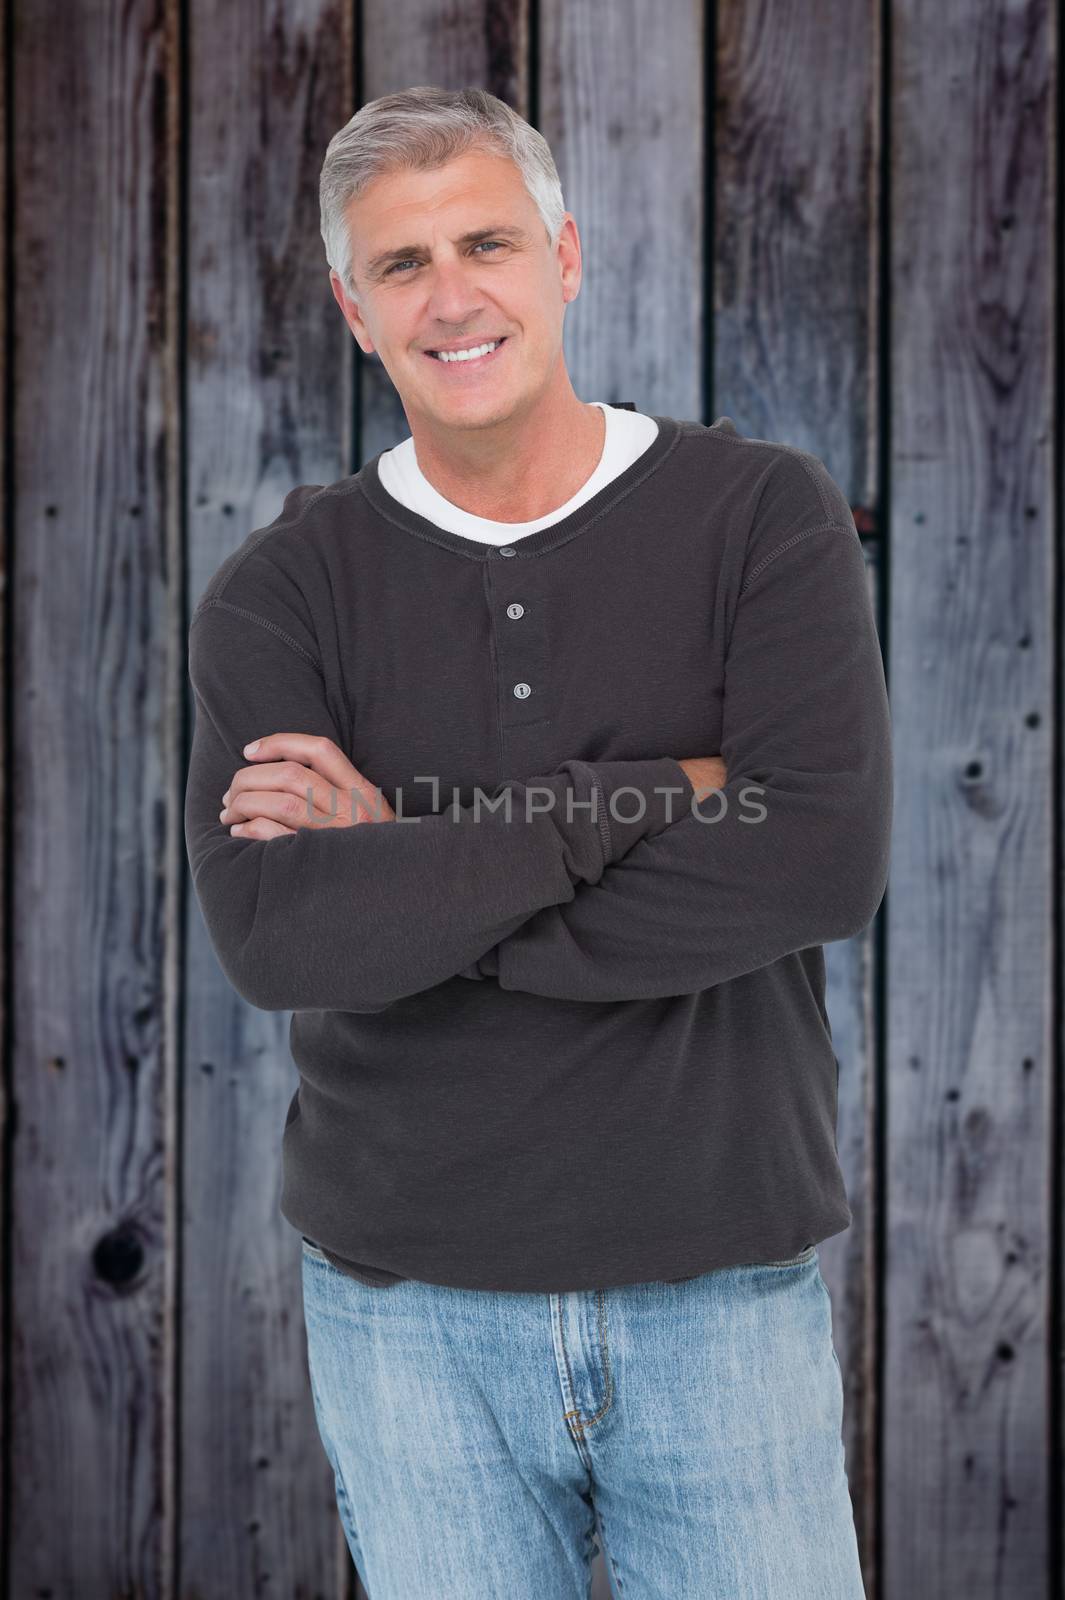 Casual man smiling at camera against grey wooden planks